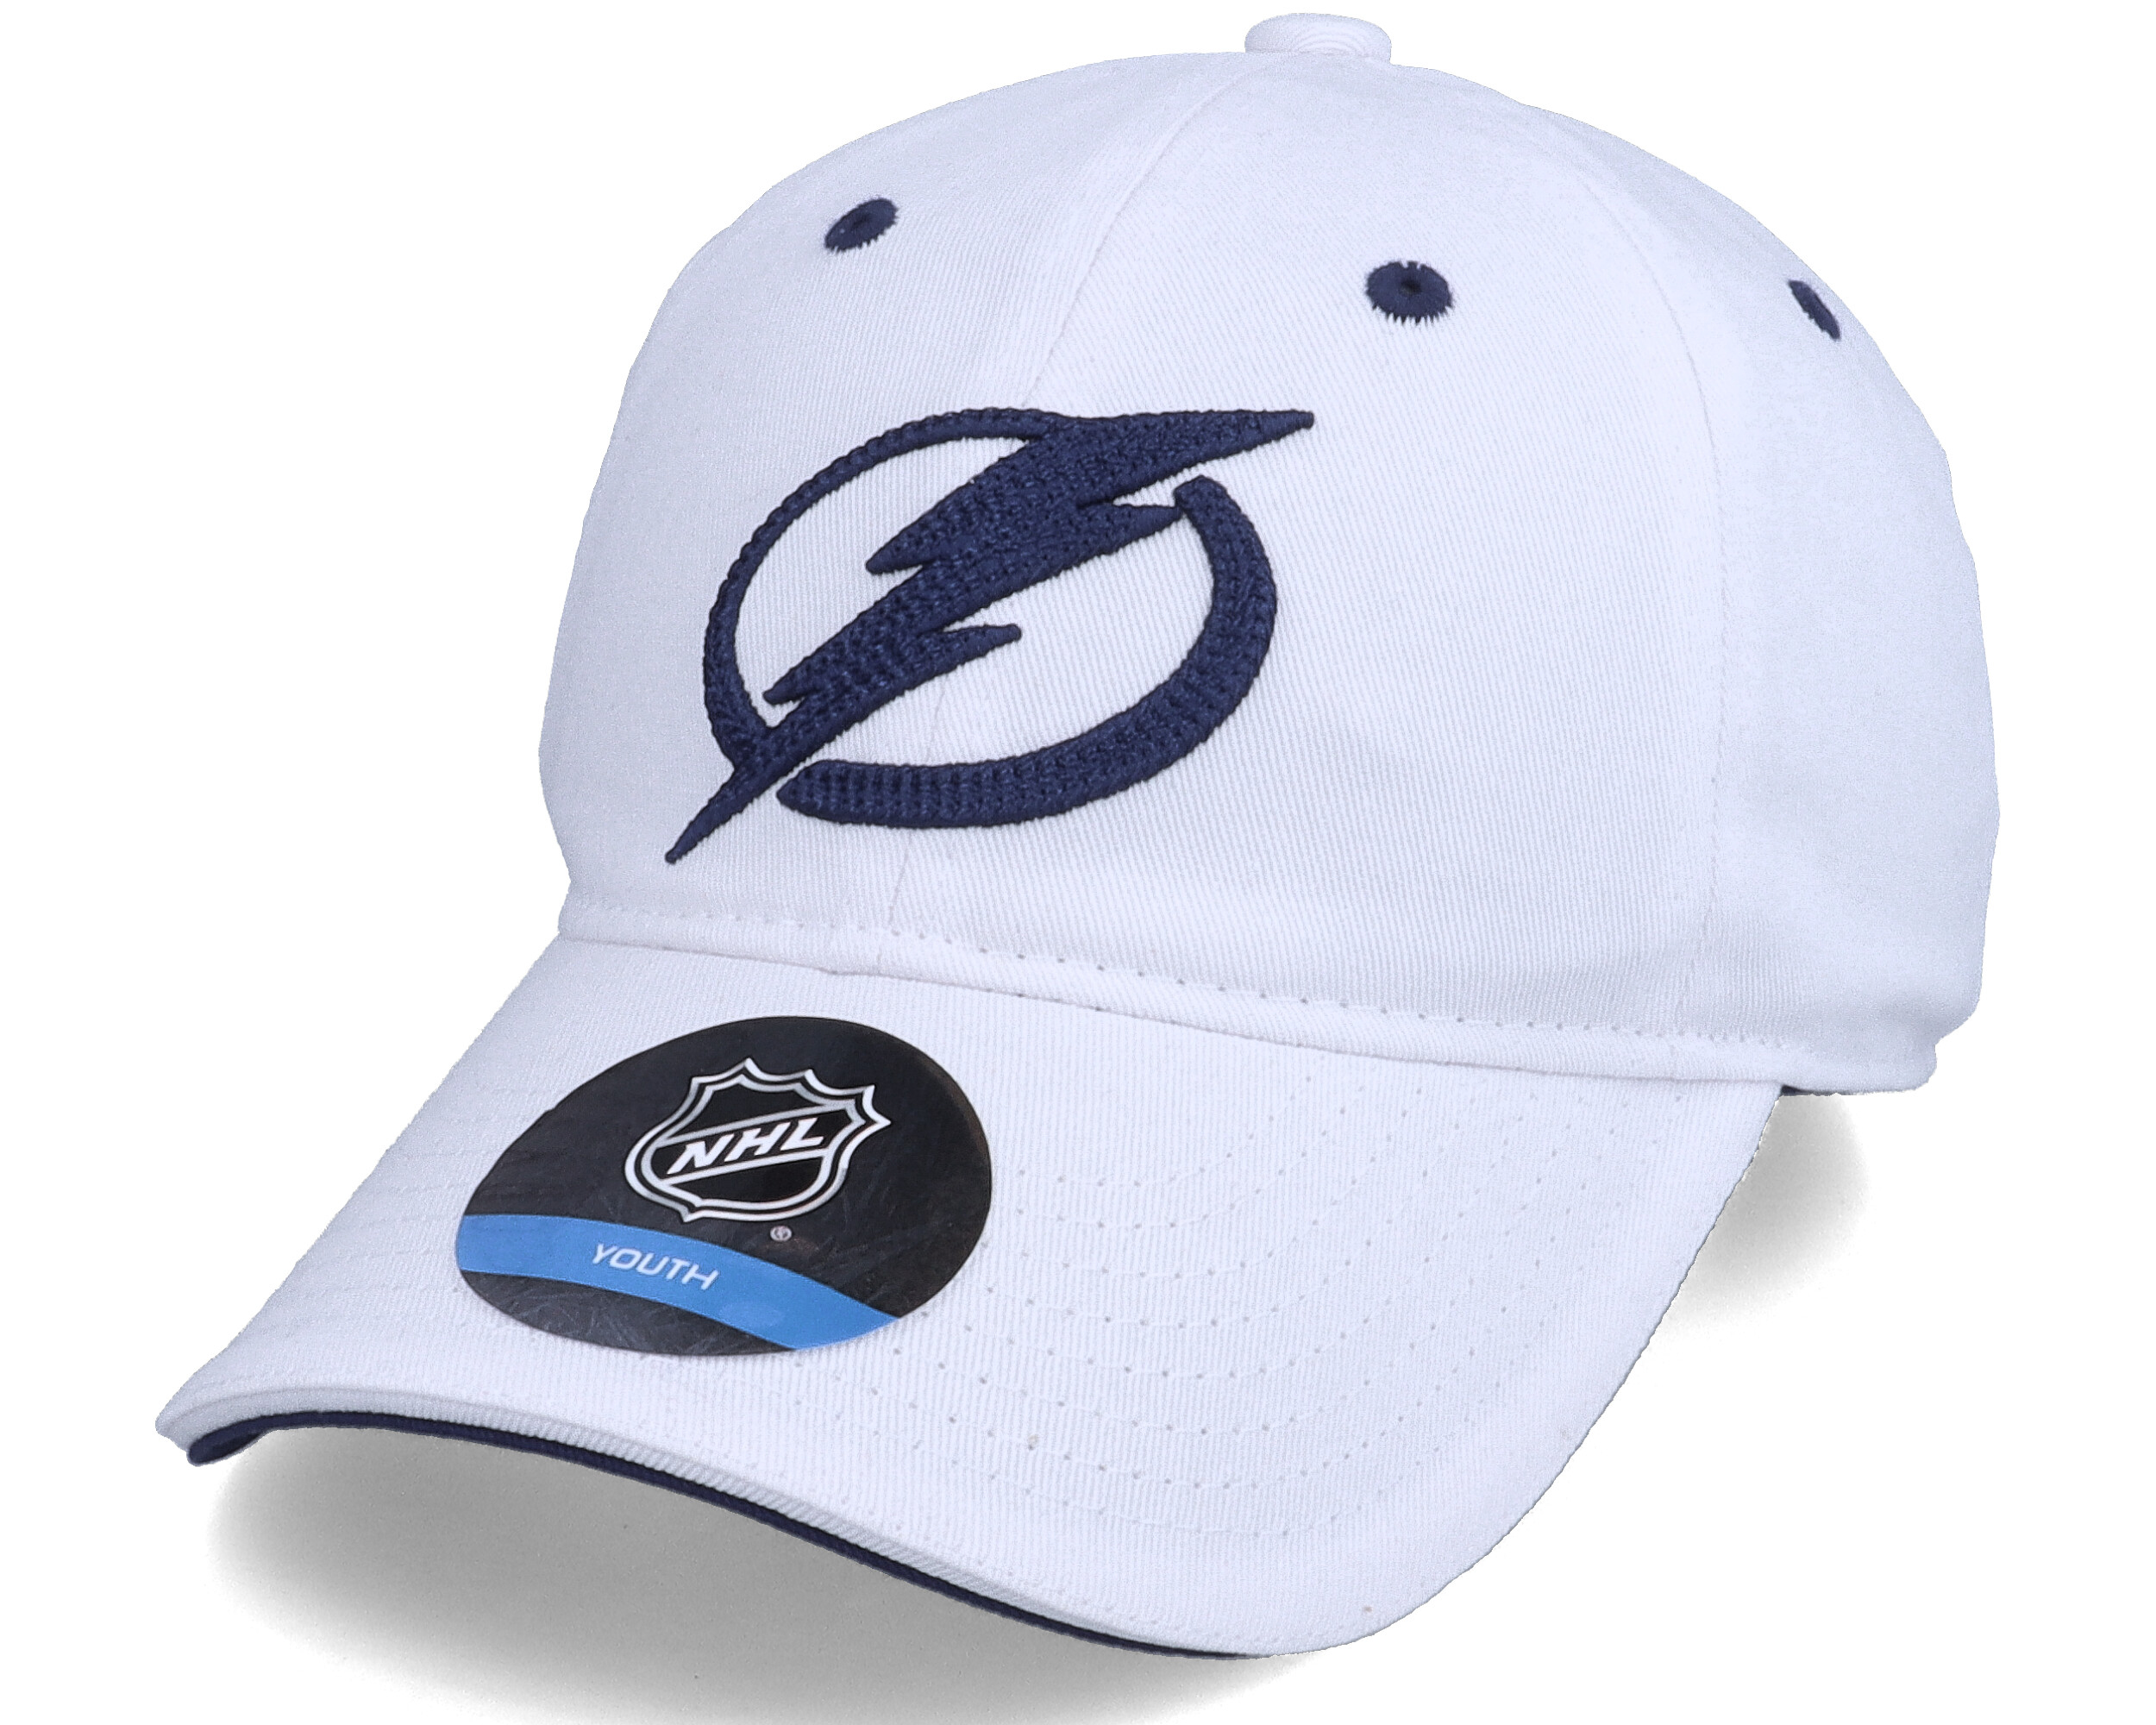 Kids Tampa Bay Lightning Fashion Logo Slouch Leafs White/Blue Dad Cap -  Outerstuff cap 